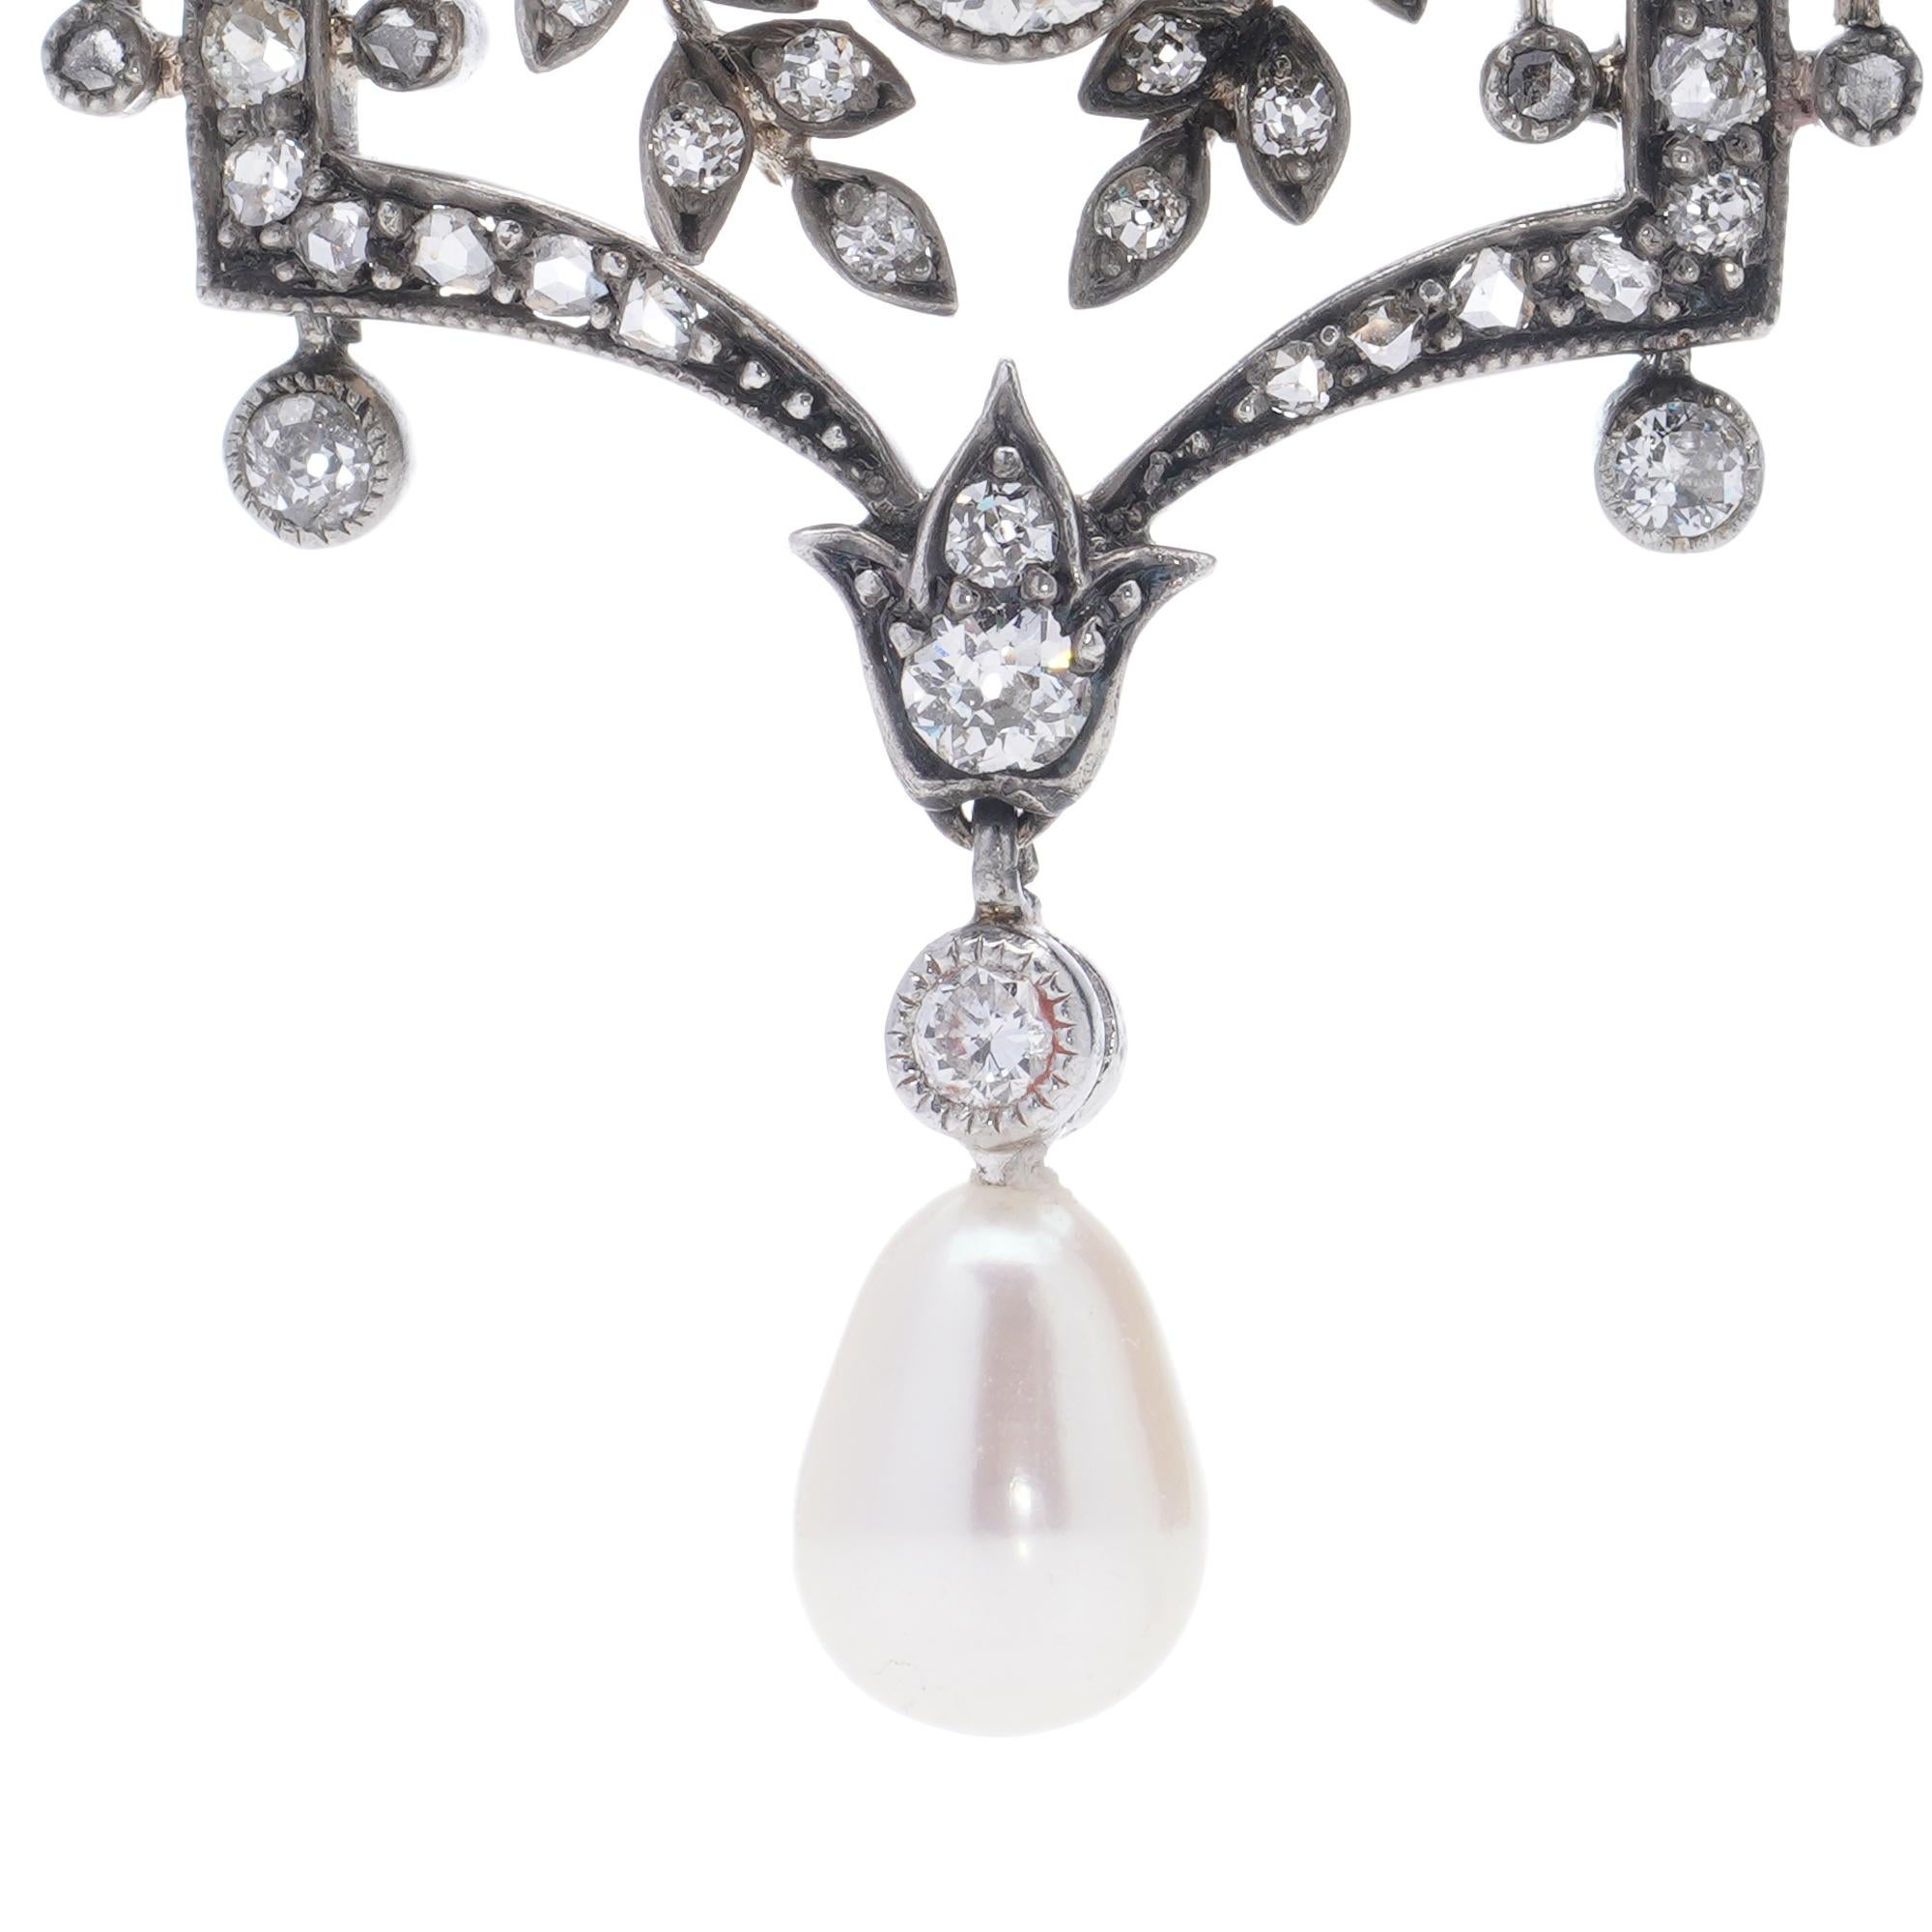 Belle Époque 18kt. Gold and Silver Pendant with Diamonds and Pearl For Sale 2